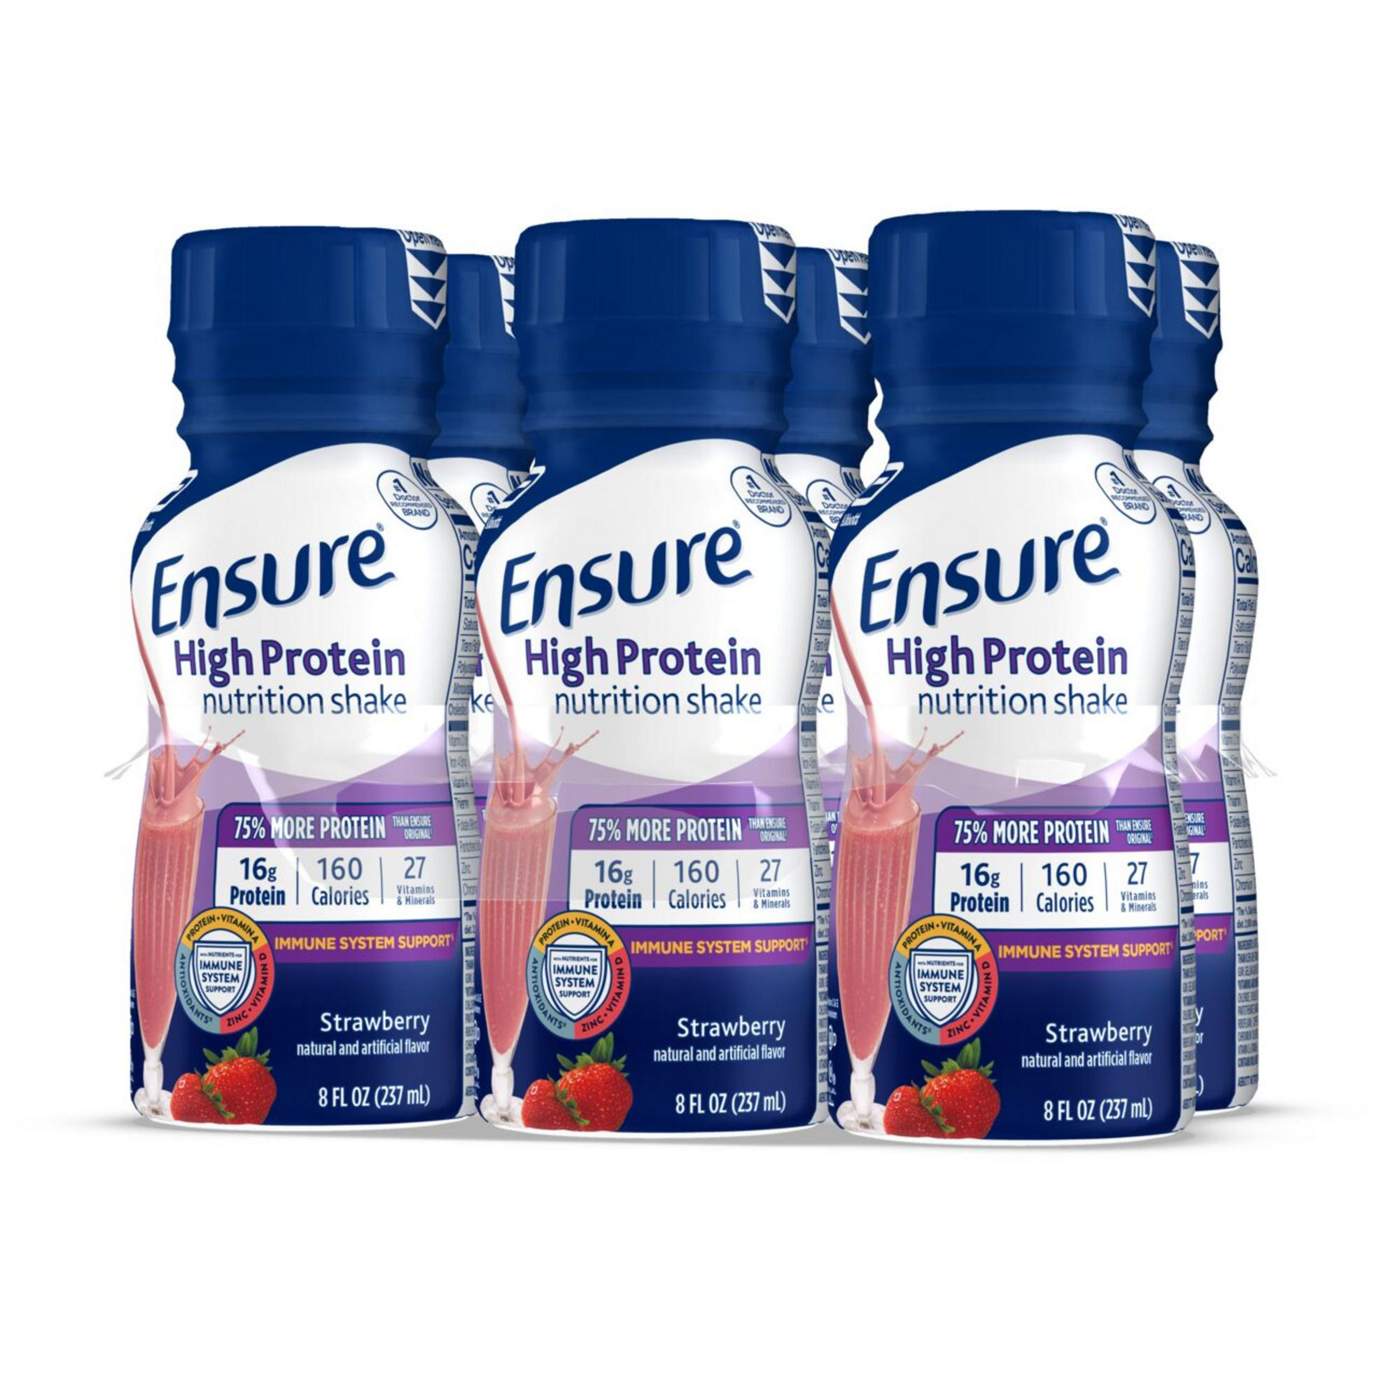 Ensure High Protein Nutrition Shake - Strawberry, 6 pk; image 4 of 11